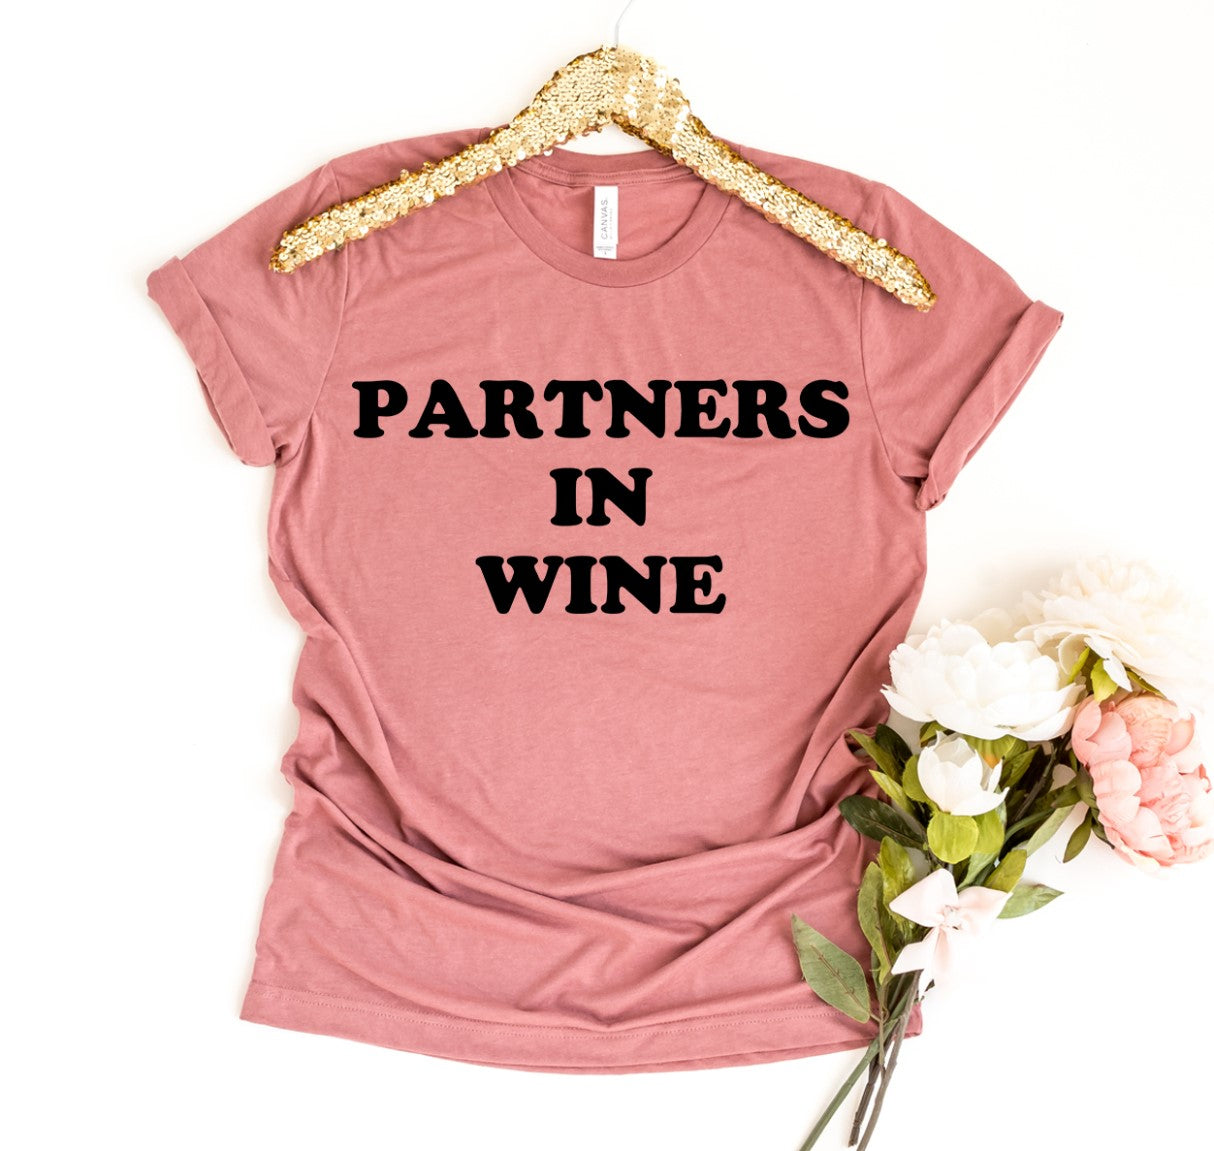 Partners in Wine Shirt - All Good Laces